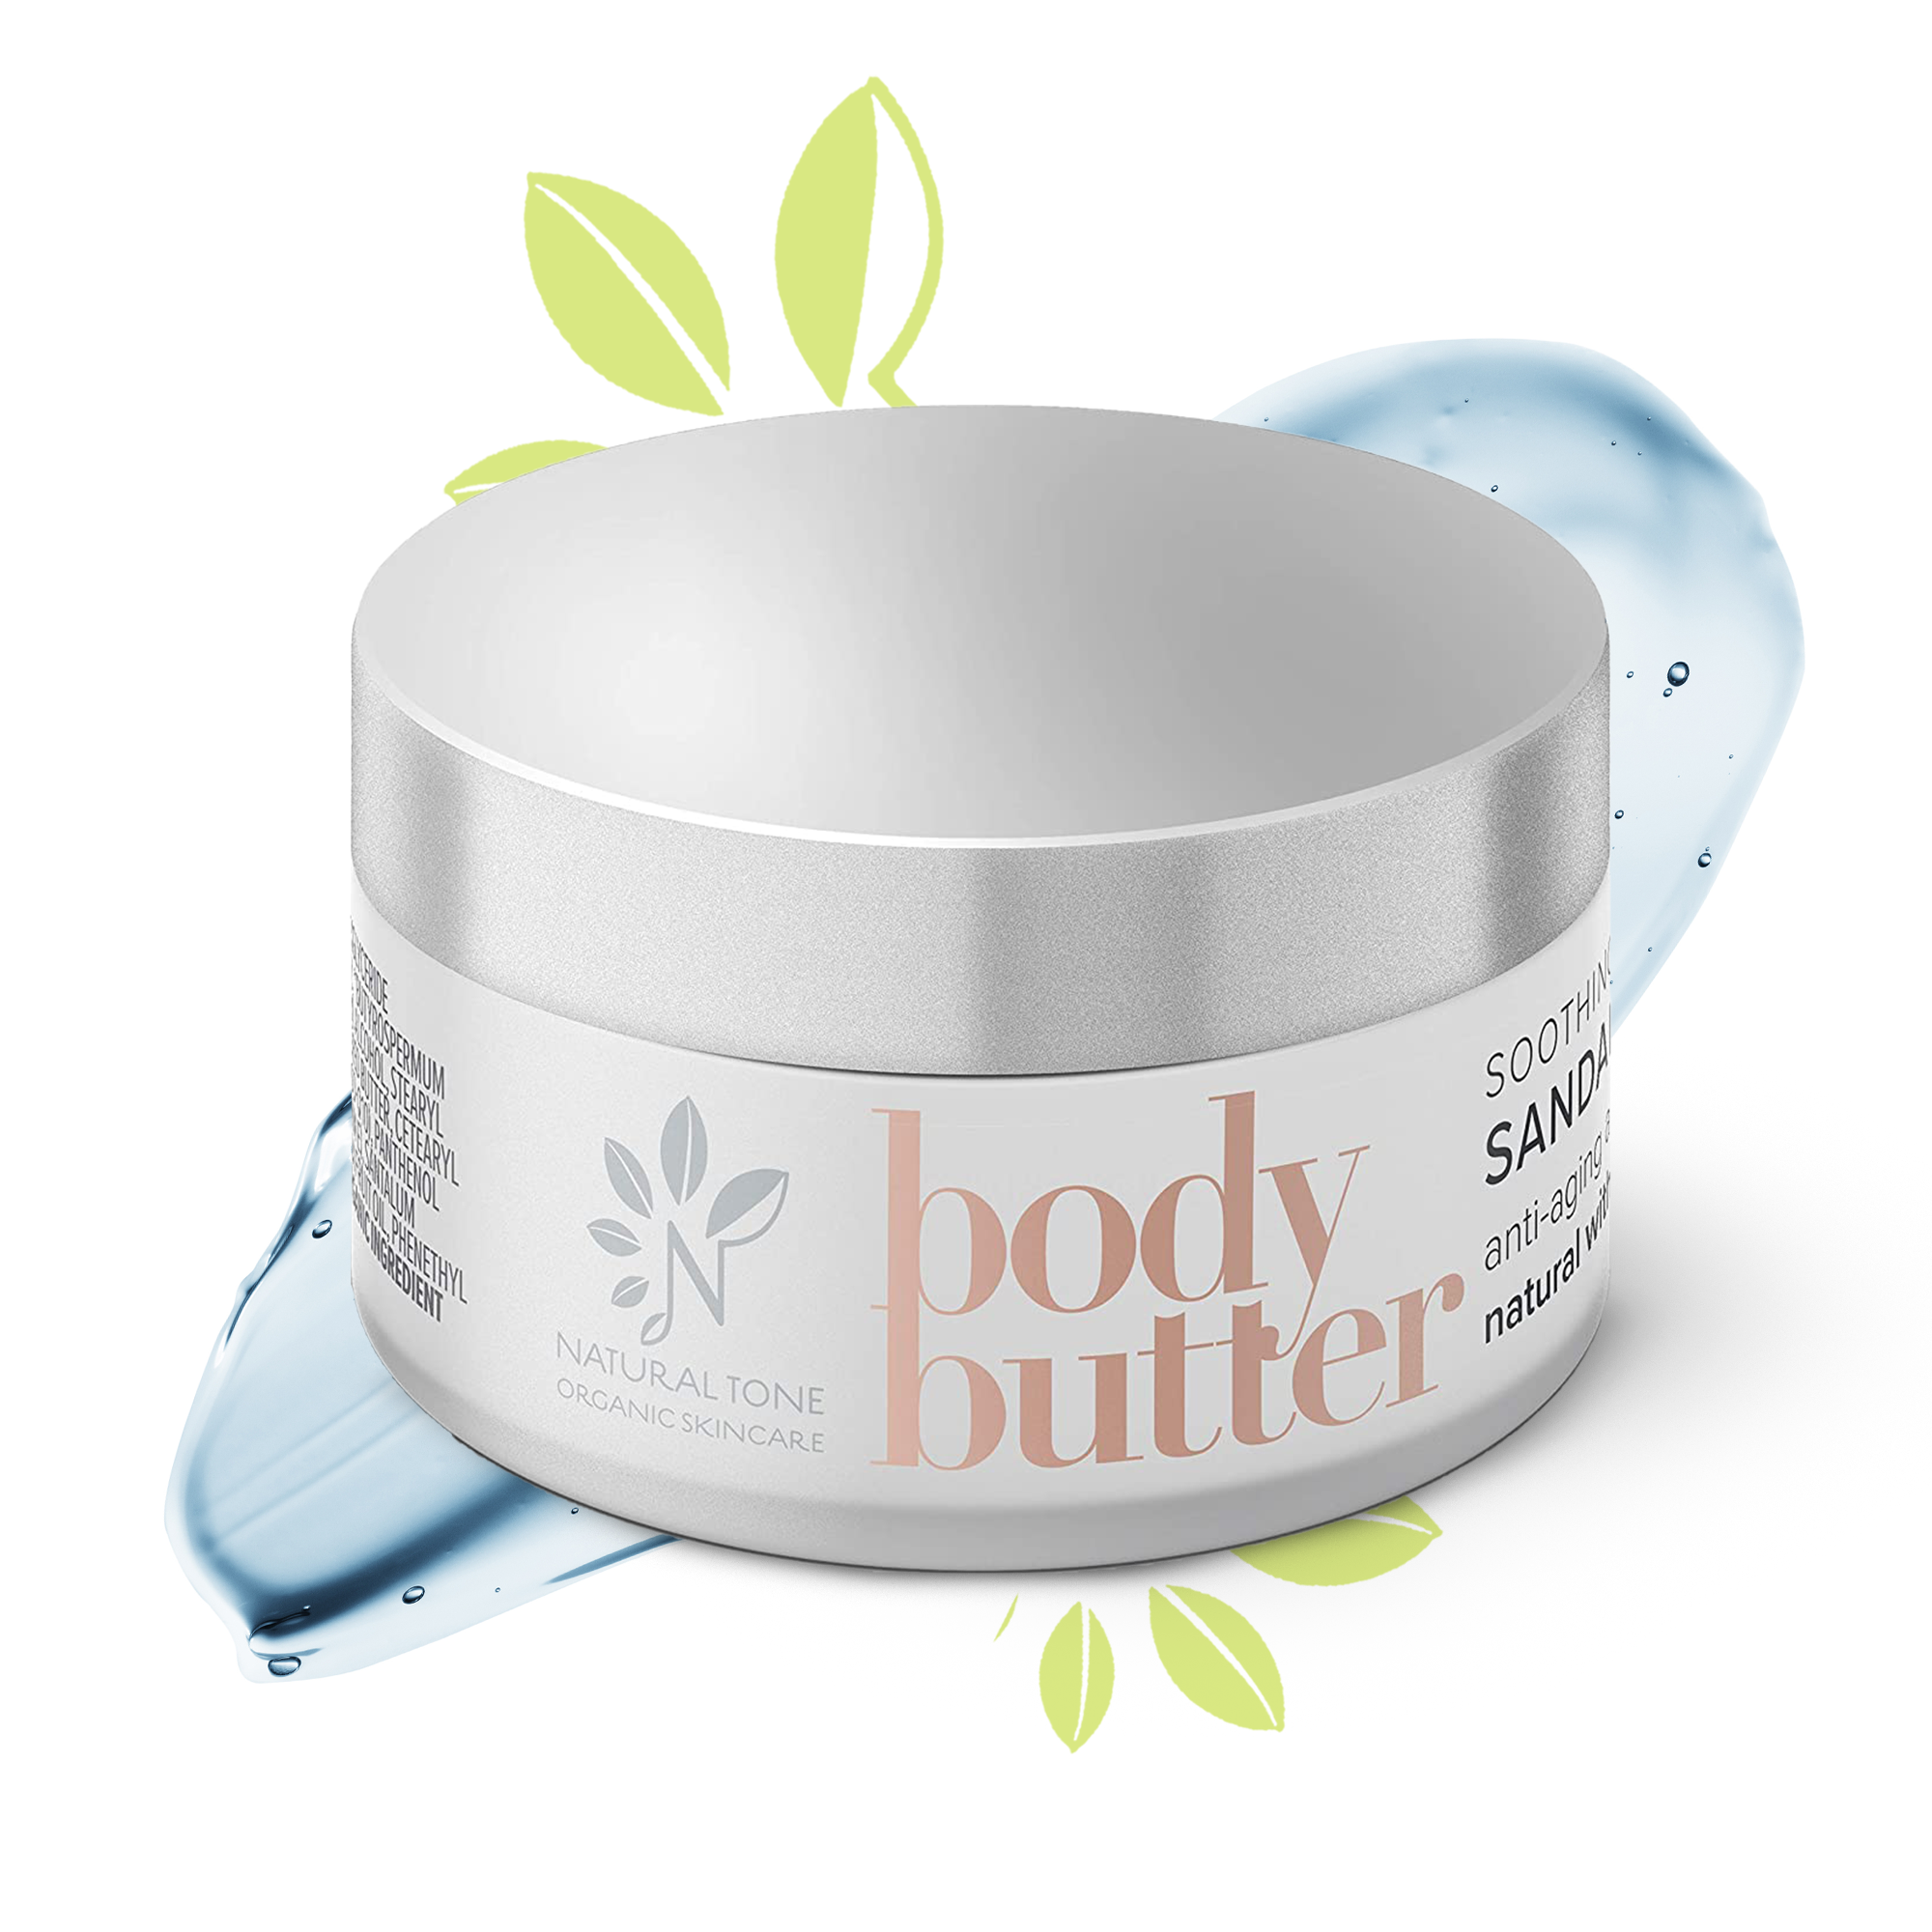 Body Butter with Vanilla & Sandalwood Essential Oils - Natural Tone Organic Skincare